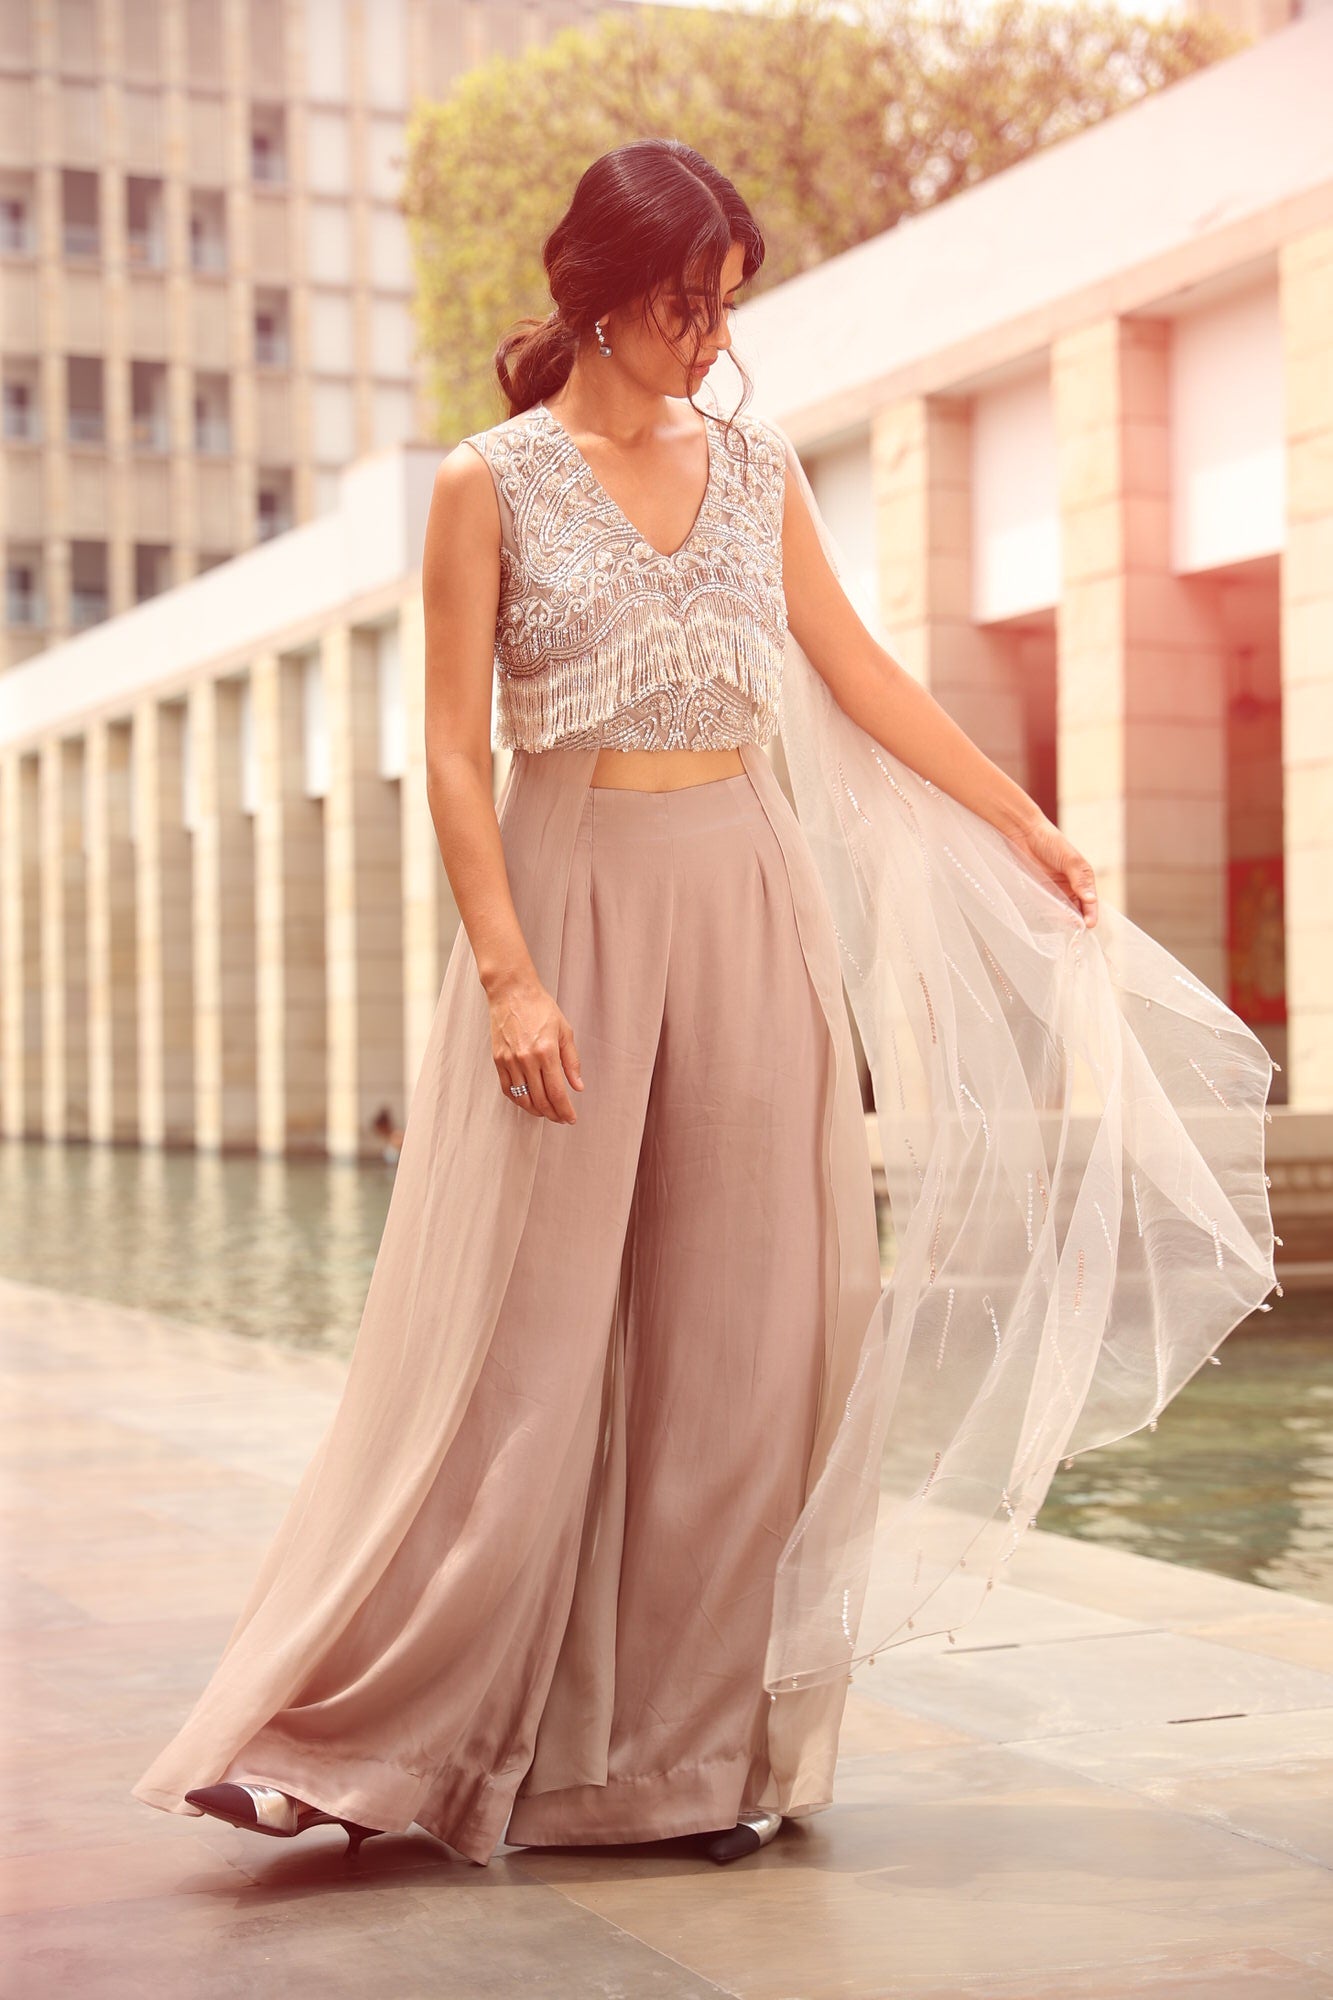 Draped Tasseled Top with Pants